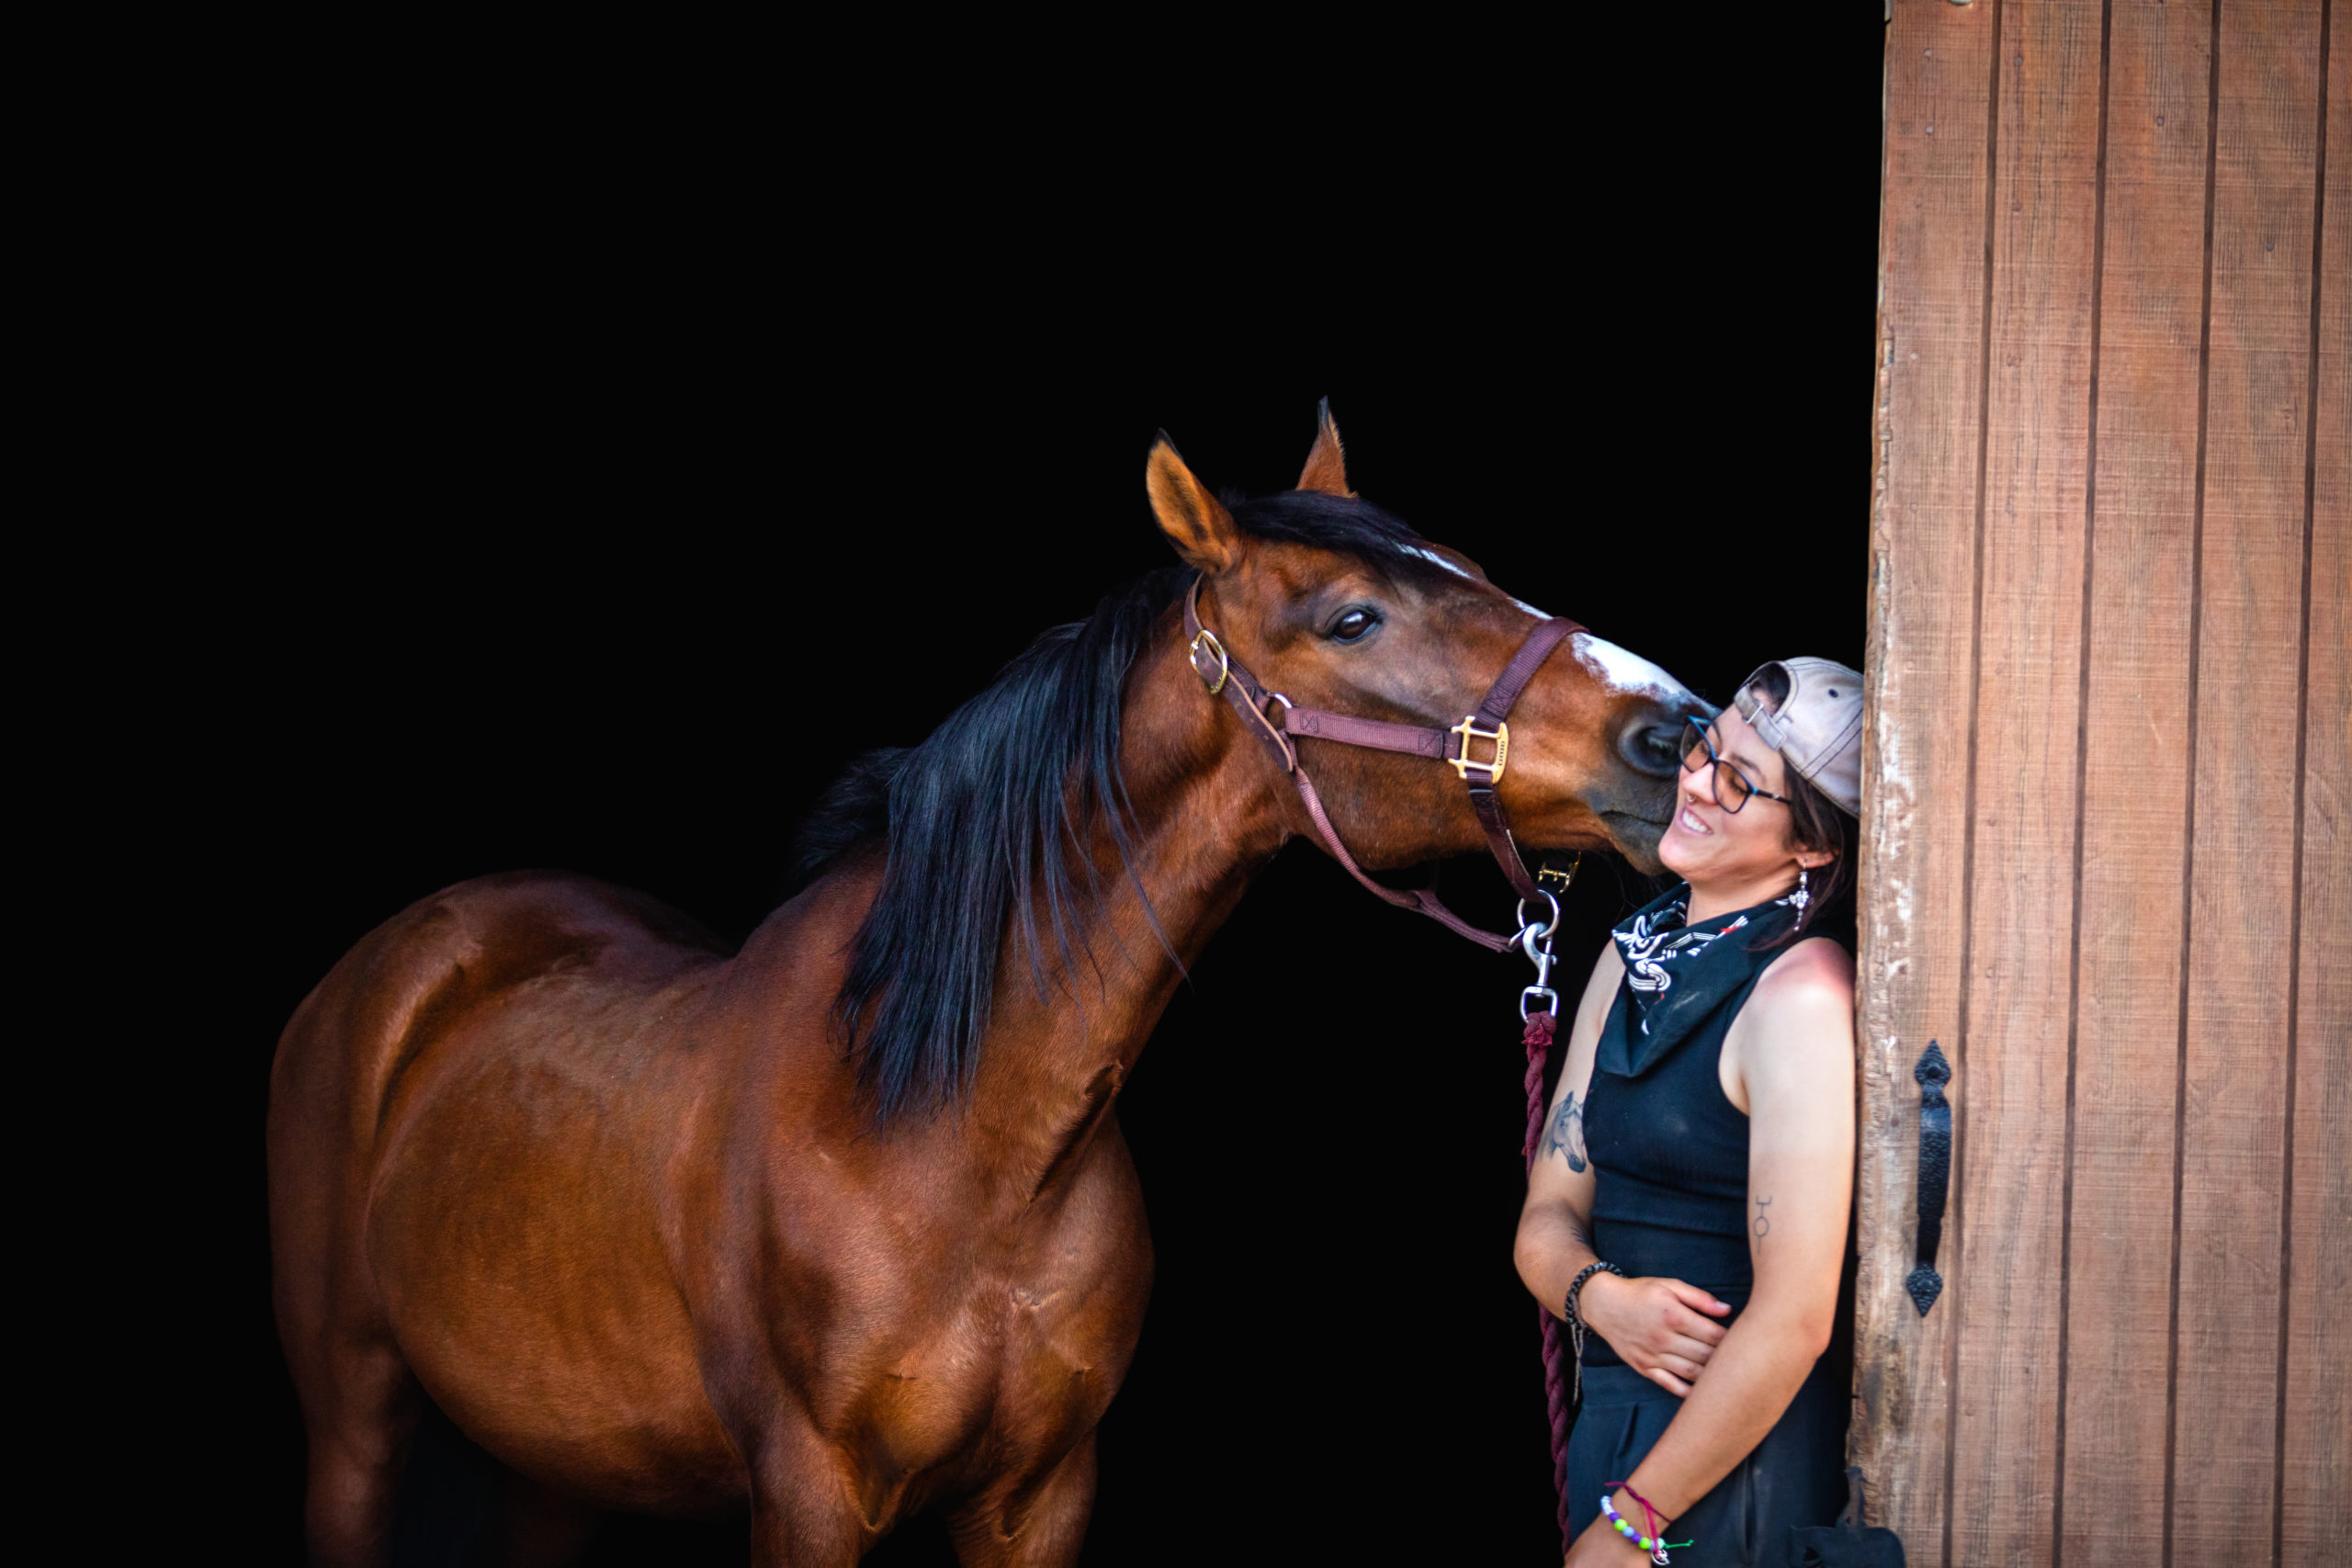 Photograph of a bay horse nuzzling a woman with short black hair against a black background.